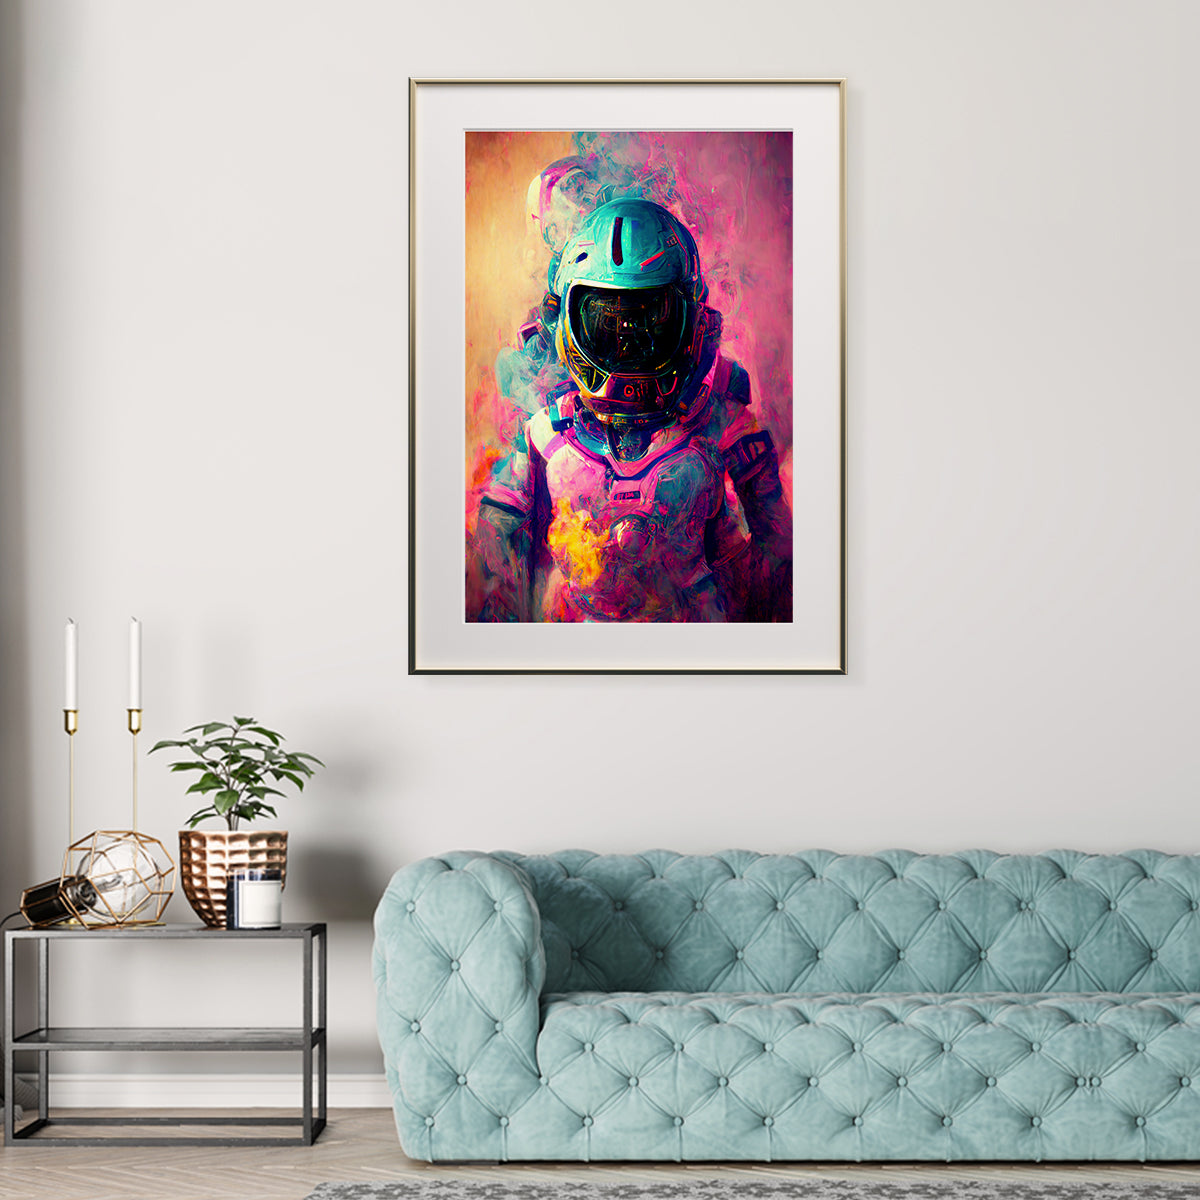 Neon Astronaut in Colorful Smoke Art Posters Prints Wall Decor-Vertical Posters NOT FRAMED-CetArt-8″x10″ inches-CetArt